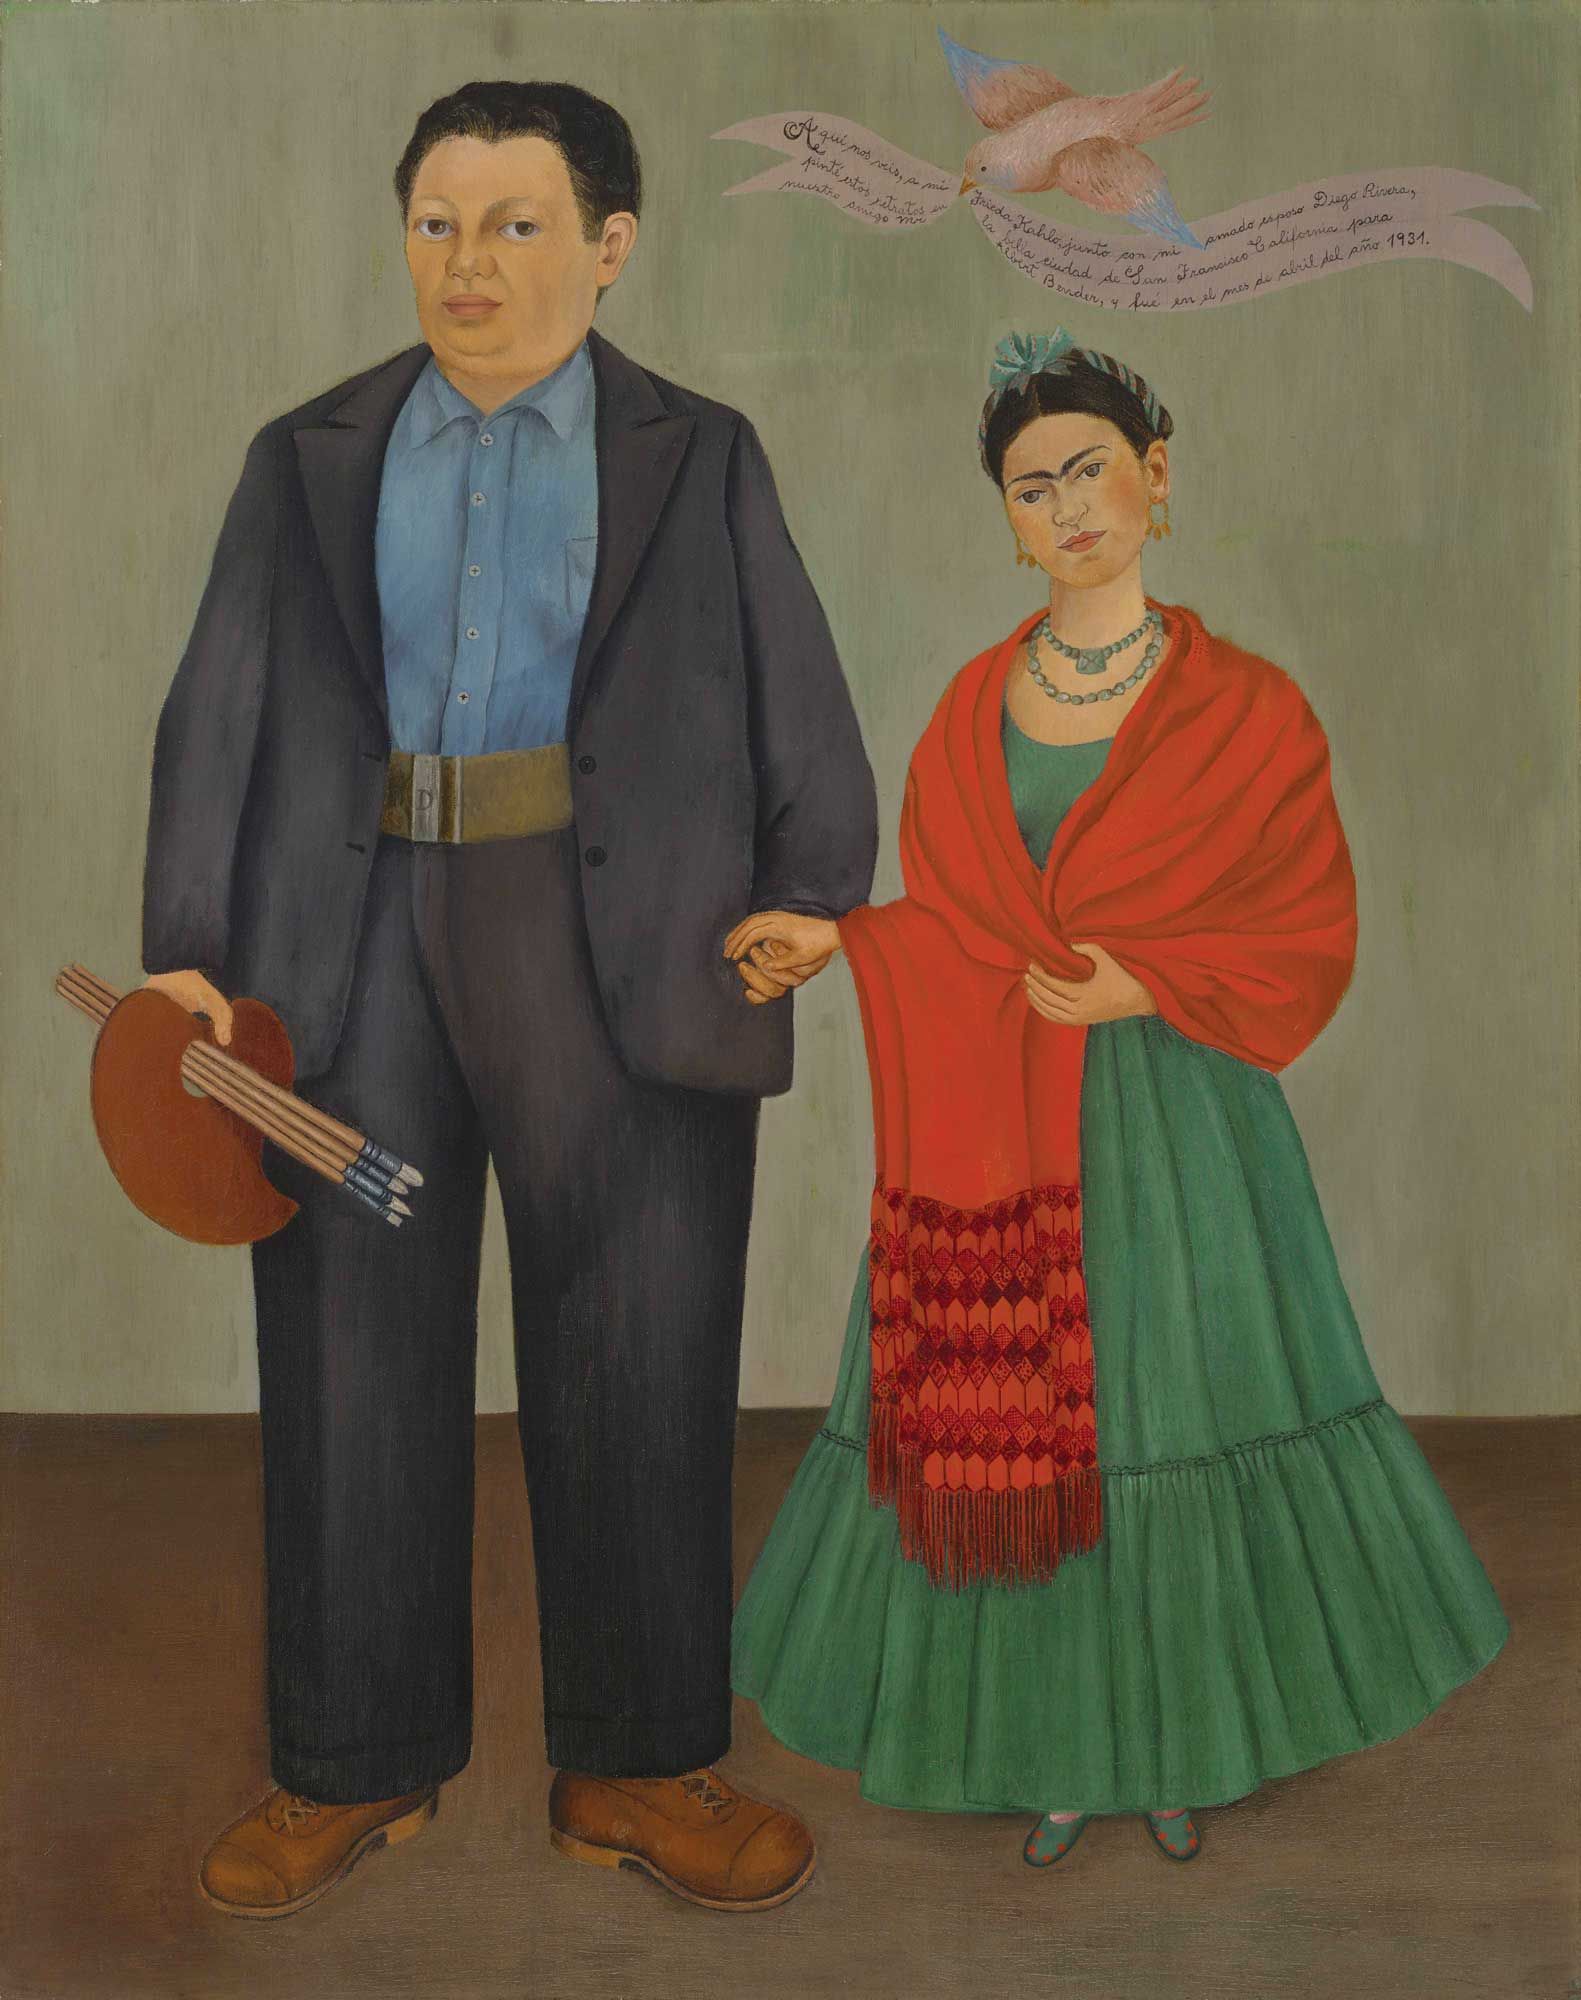 Frida Kahlo, Biography, Paintings, & Facts